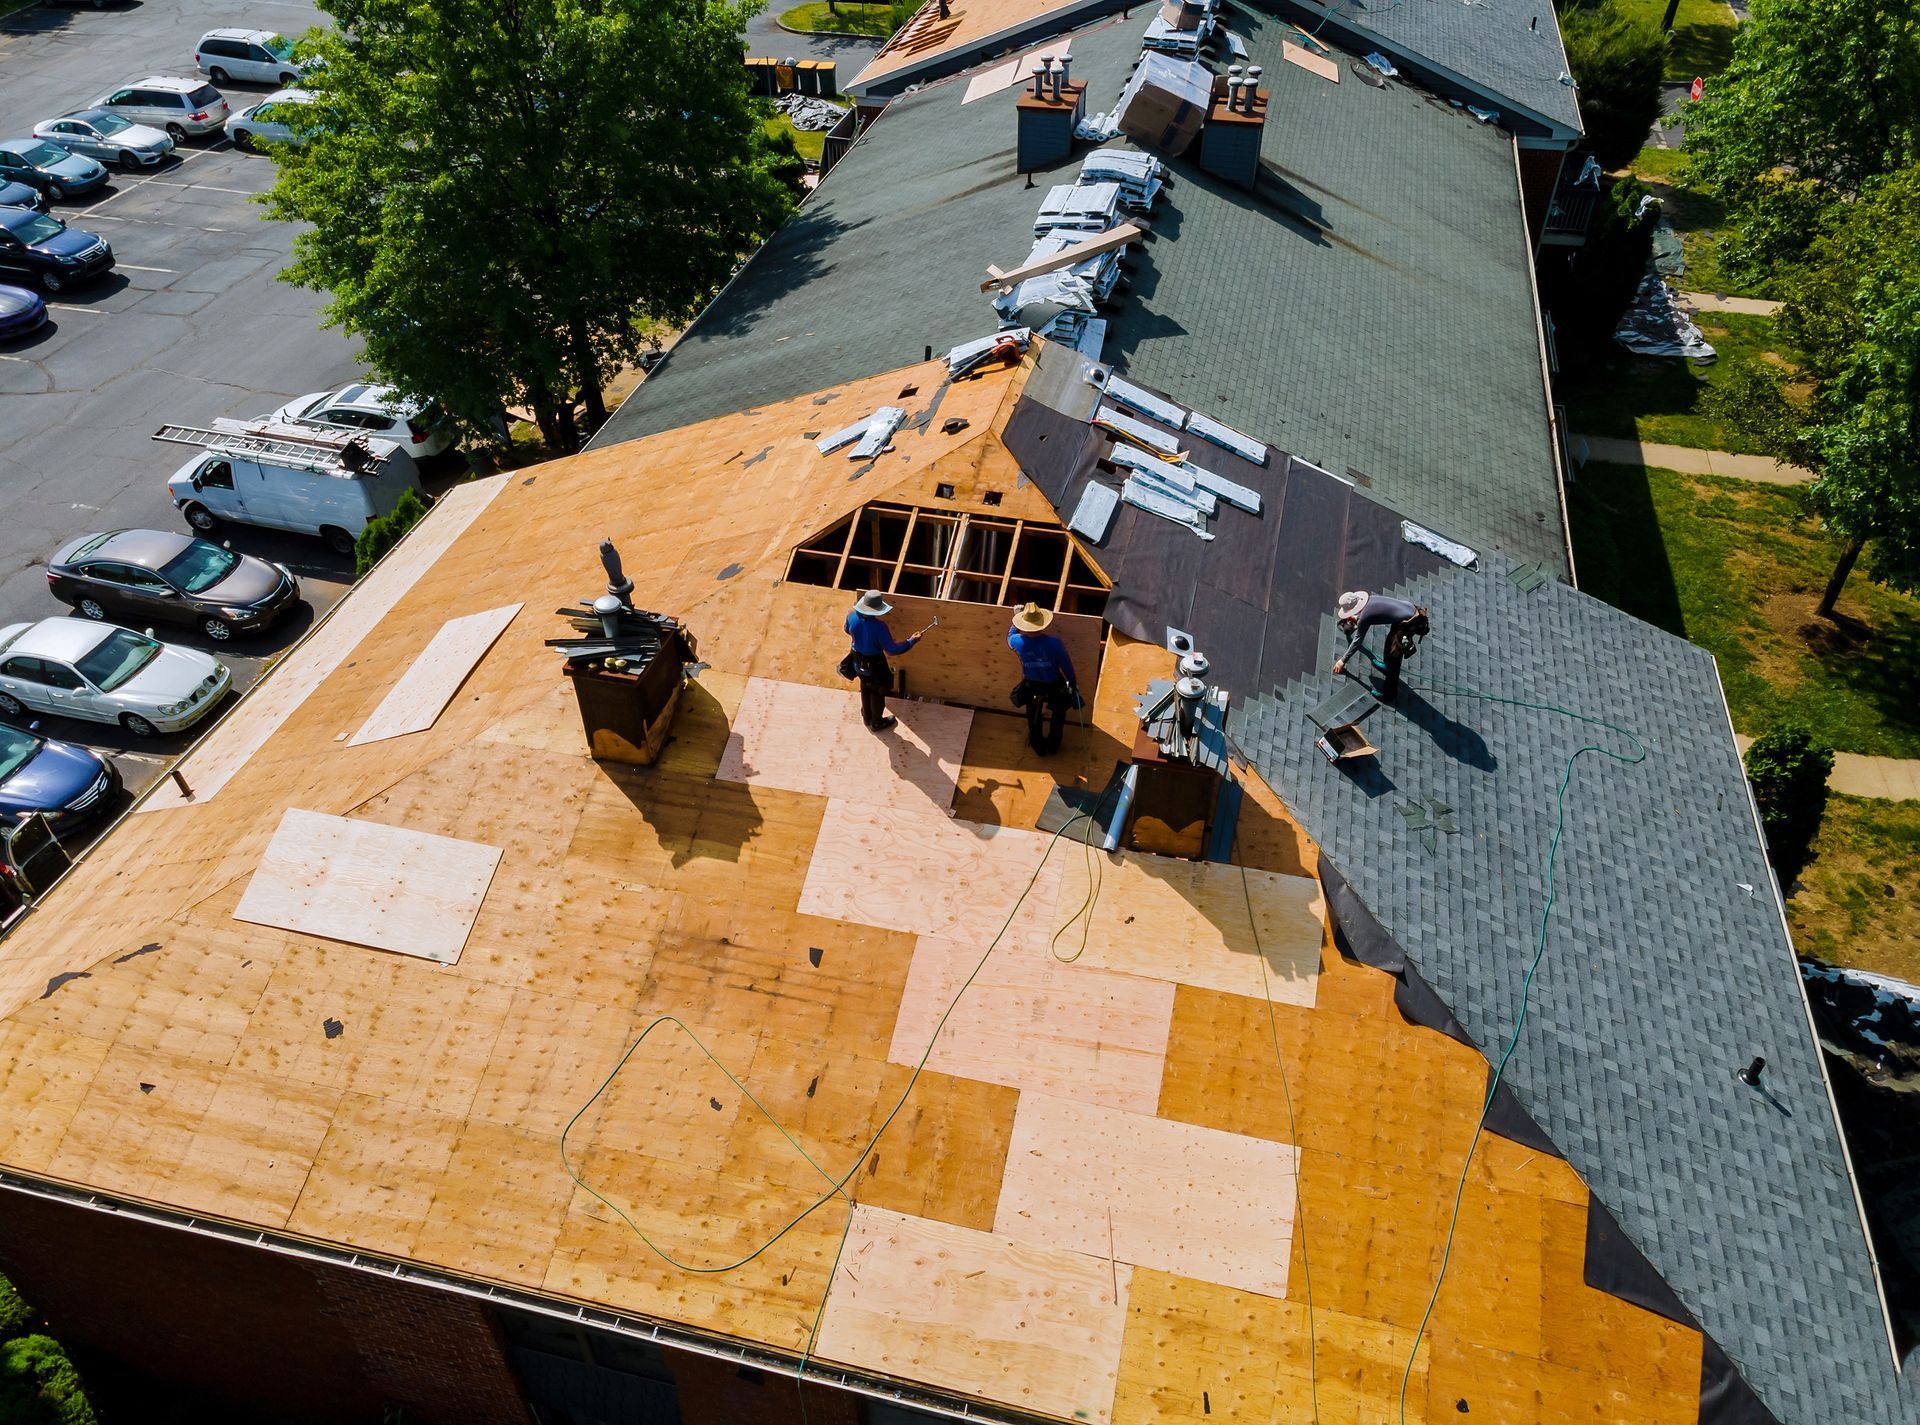 A group of people are working on the roof of a building